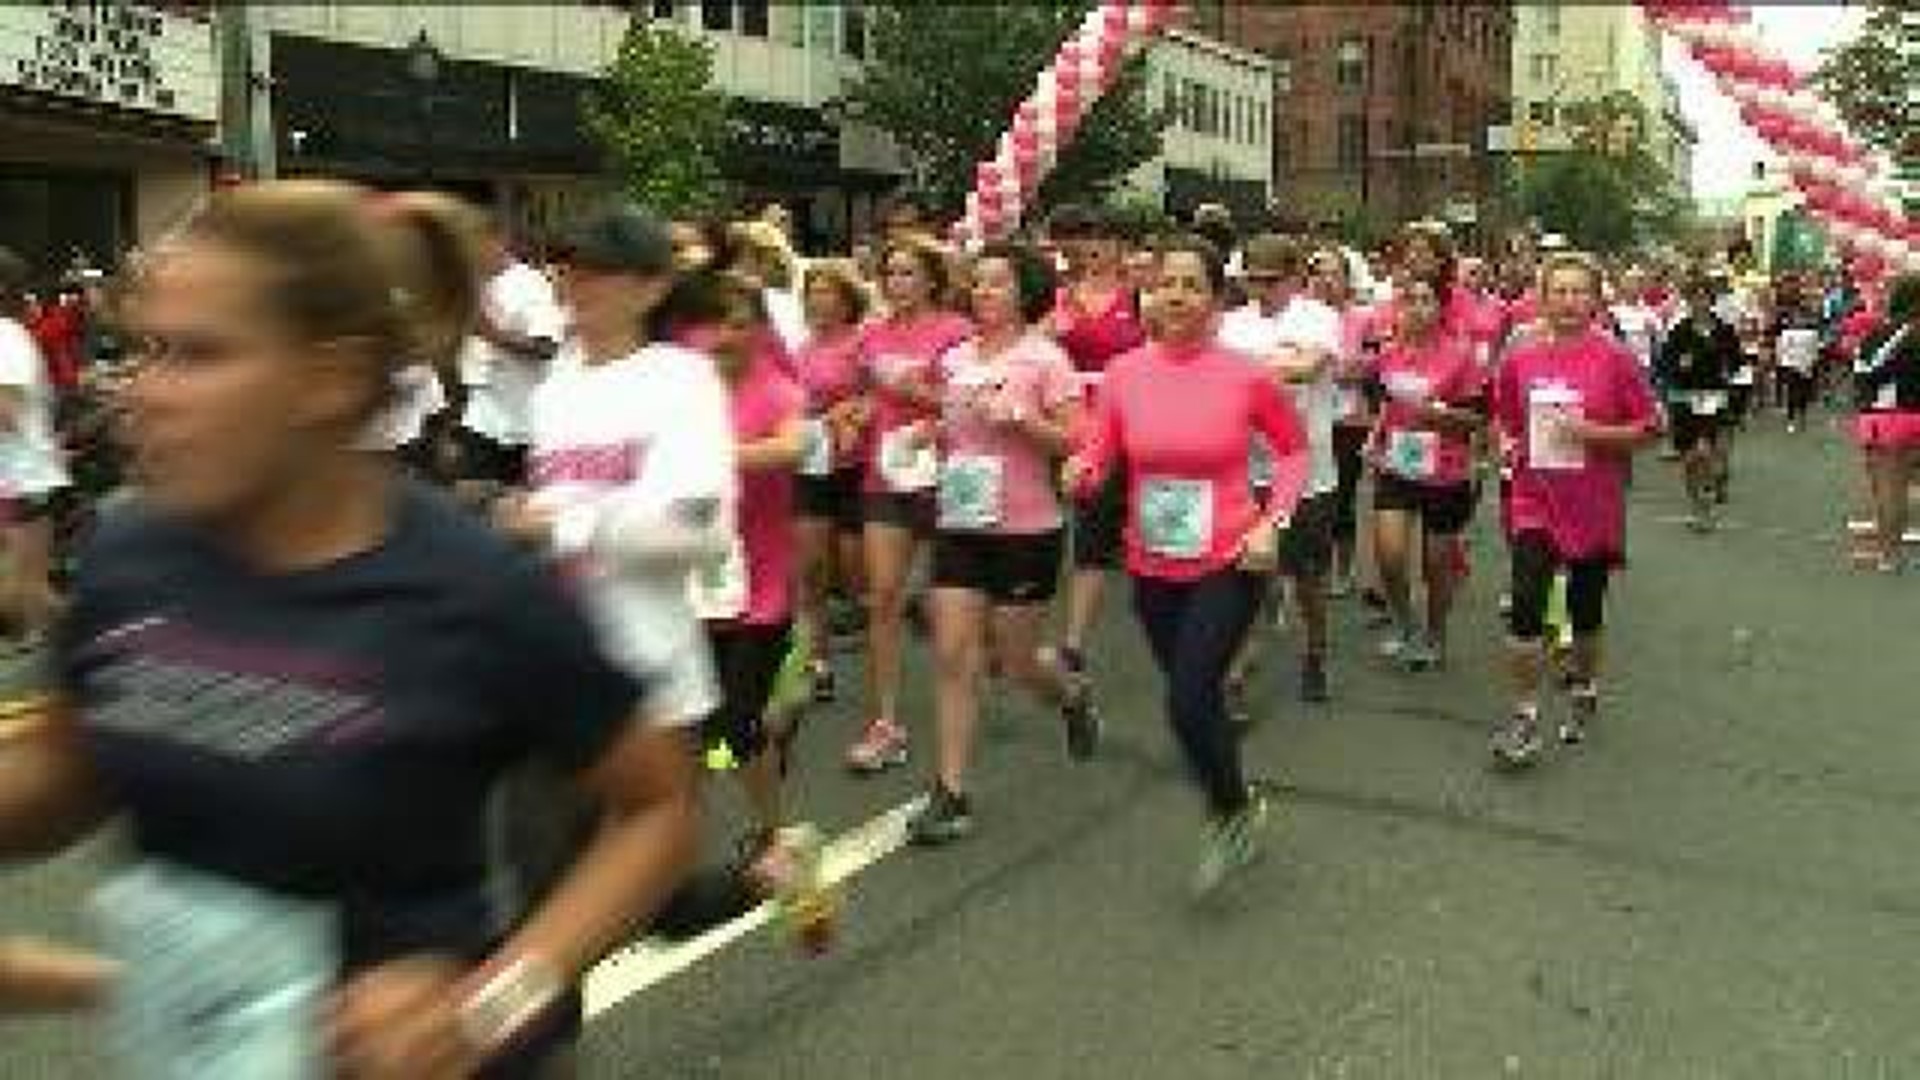 Scranton Goes Pink for the Race for the Cure